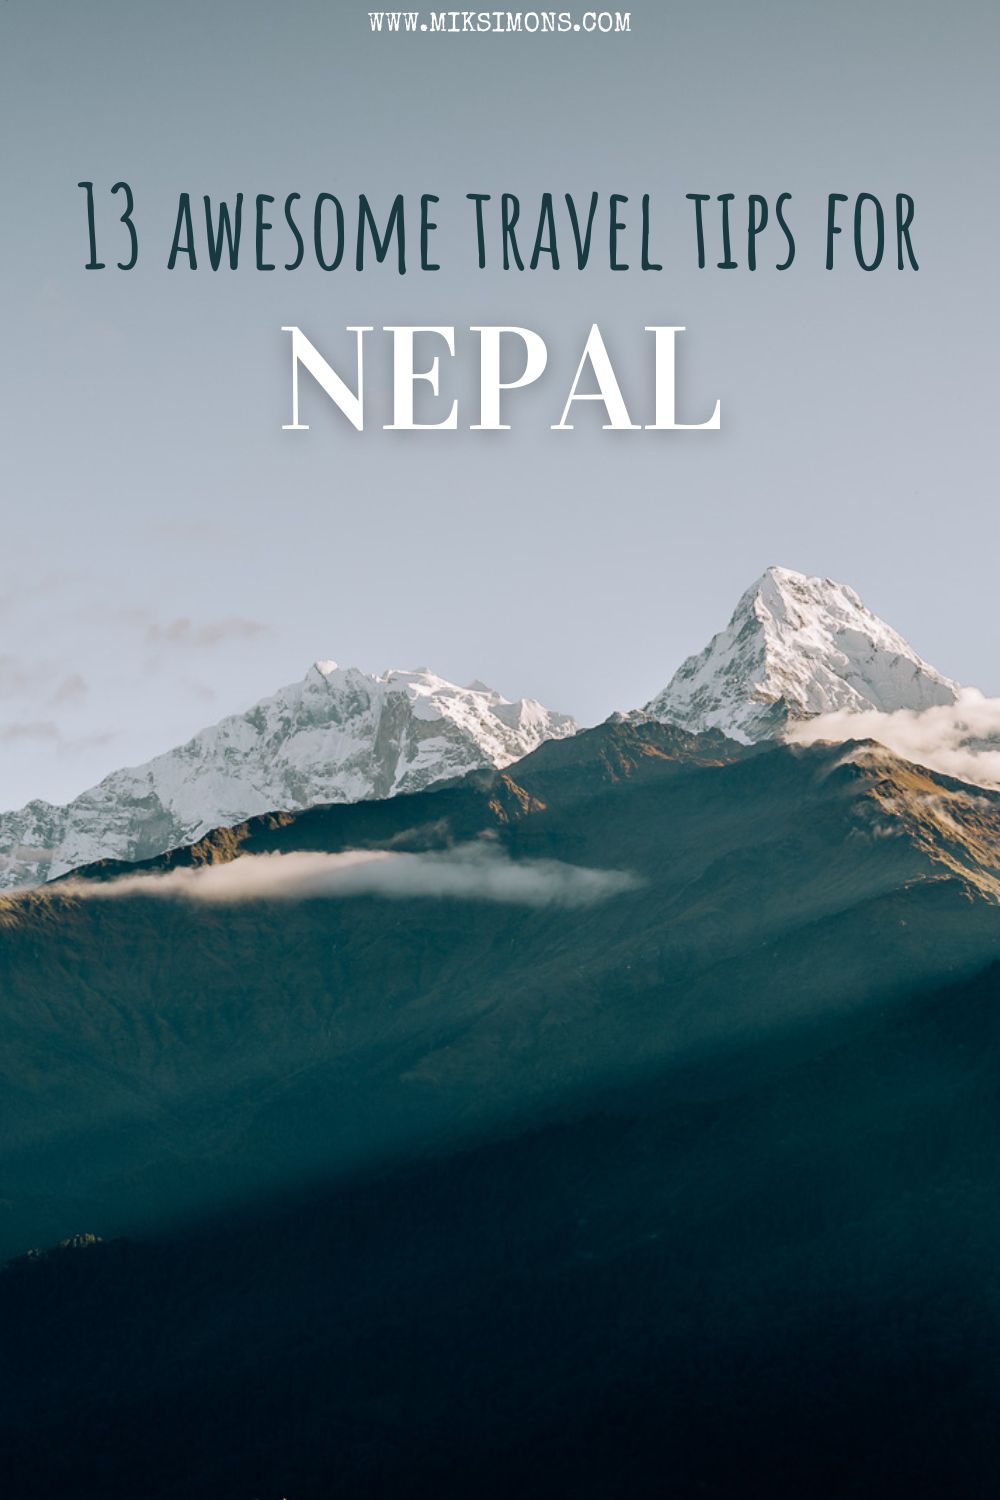 13 AMAZING TRAVEL TIPS FOR NEPAL - THINGS YOU NEED TO KNOW2